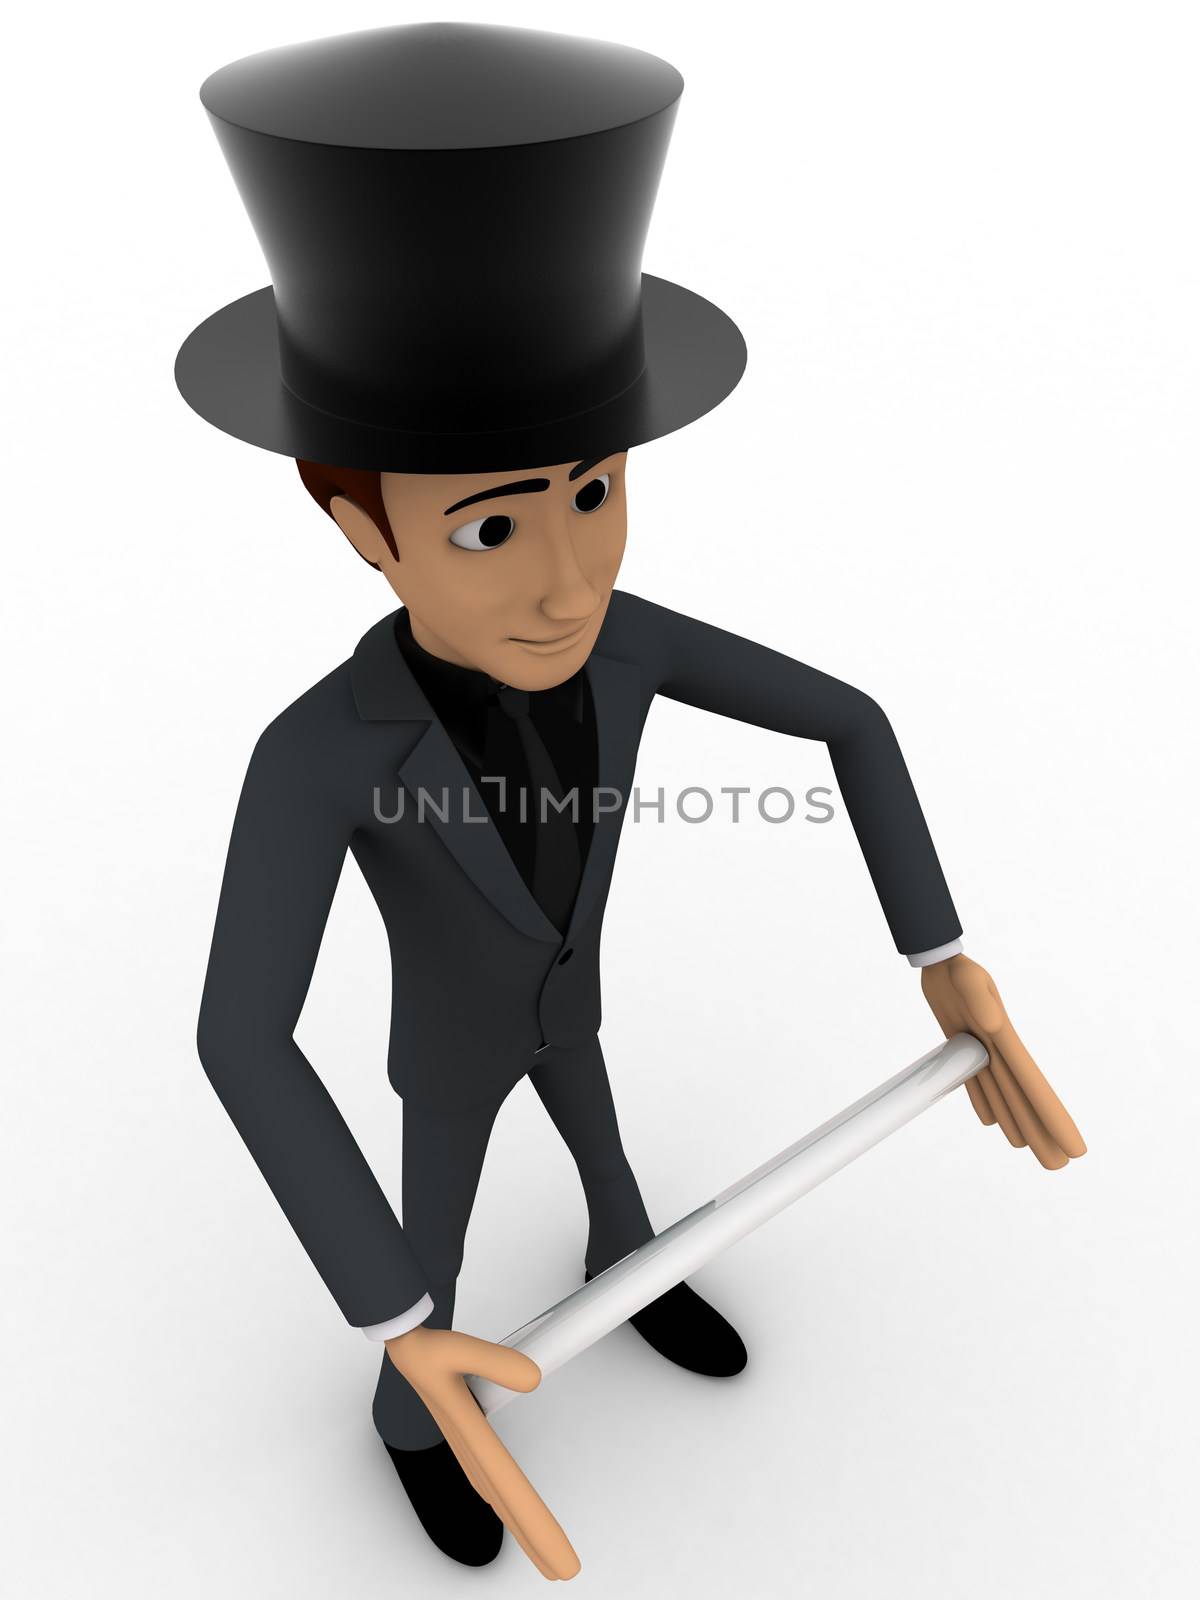 3d man magician wearing hat and holding rod concept by touchmenithin@gmail.com